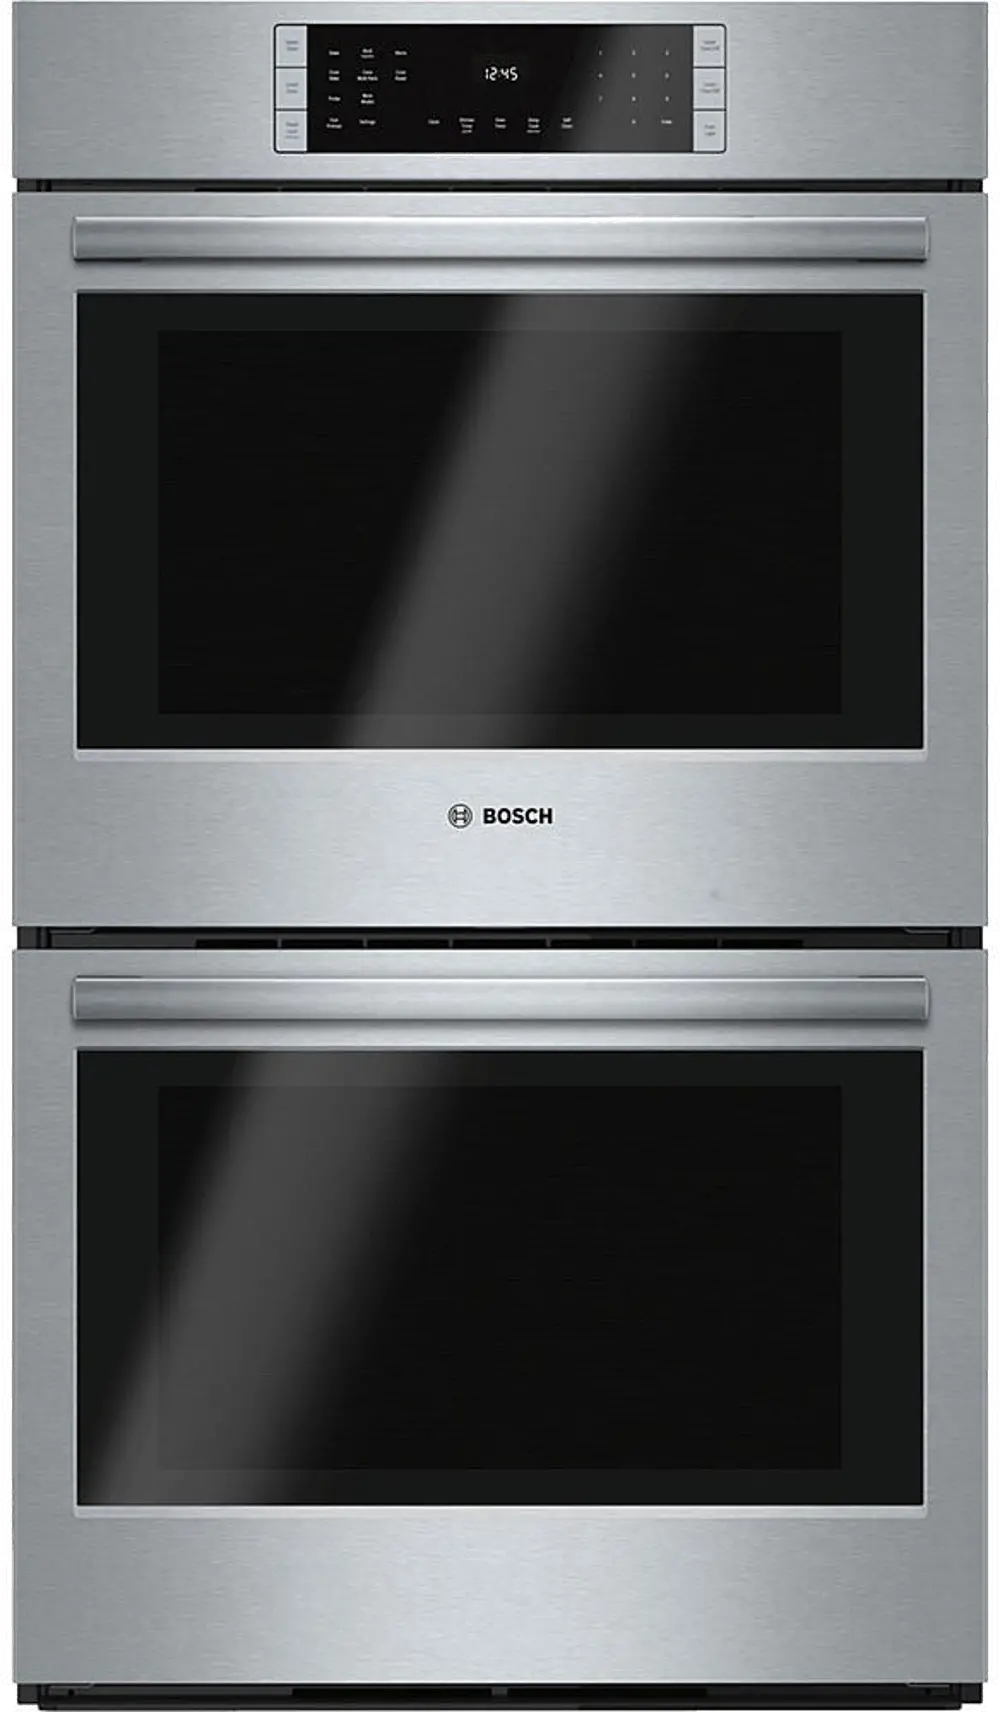 HBLP651LUC Bosch 9.2 cu ft Double Wall Oven - Stainless Steel 30 Inch-1